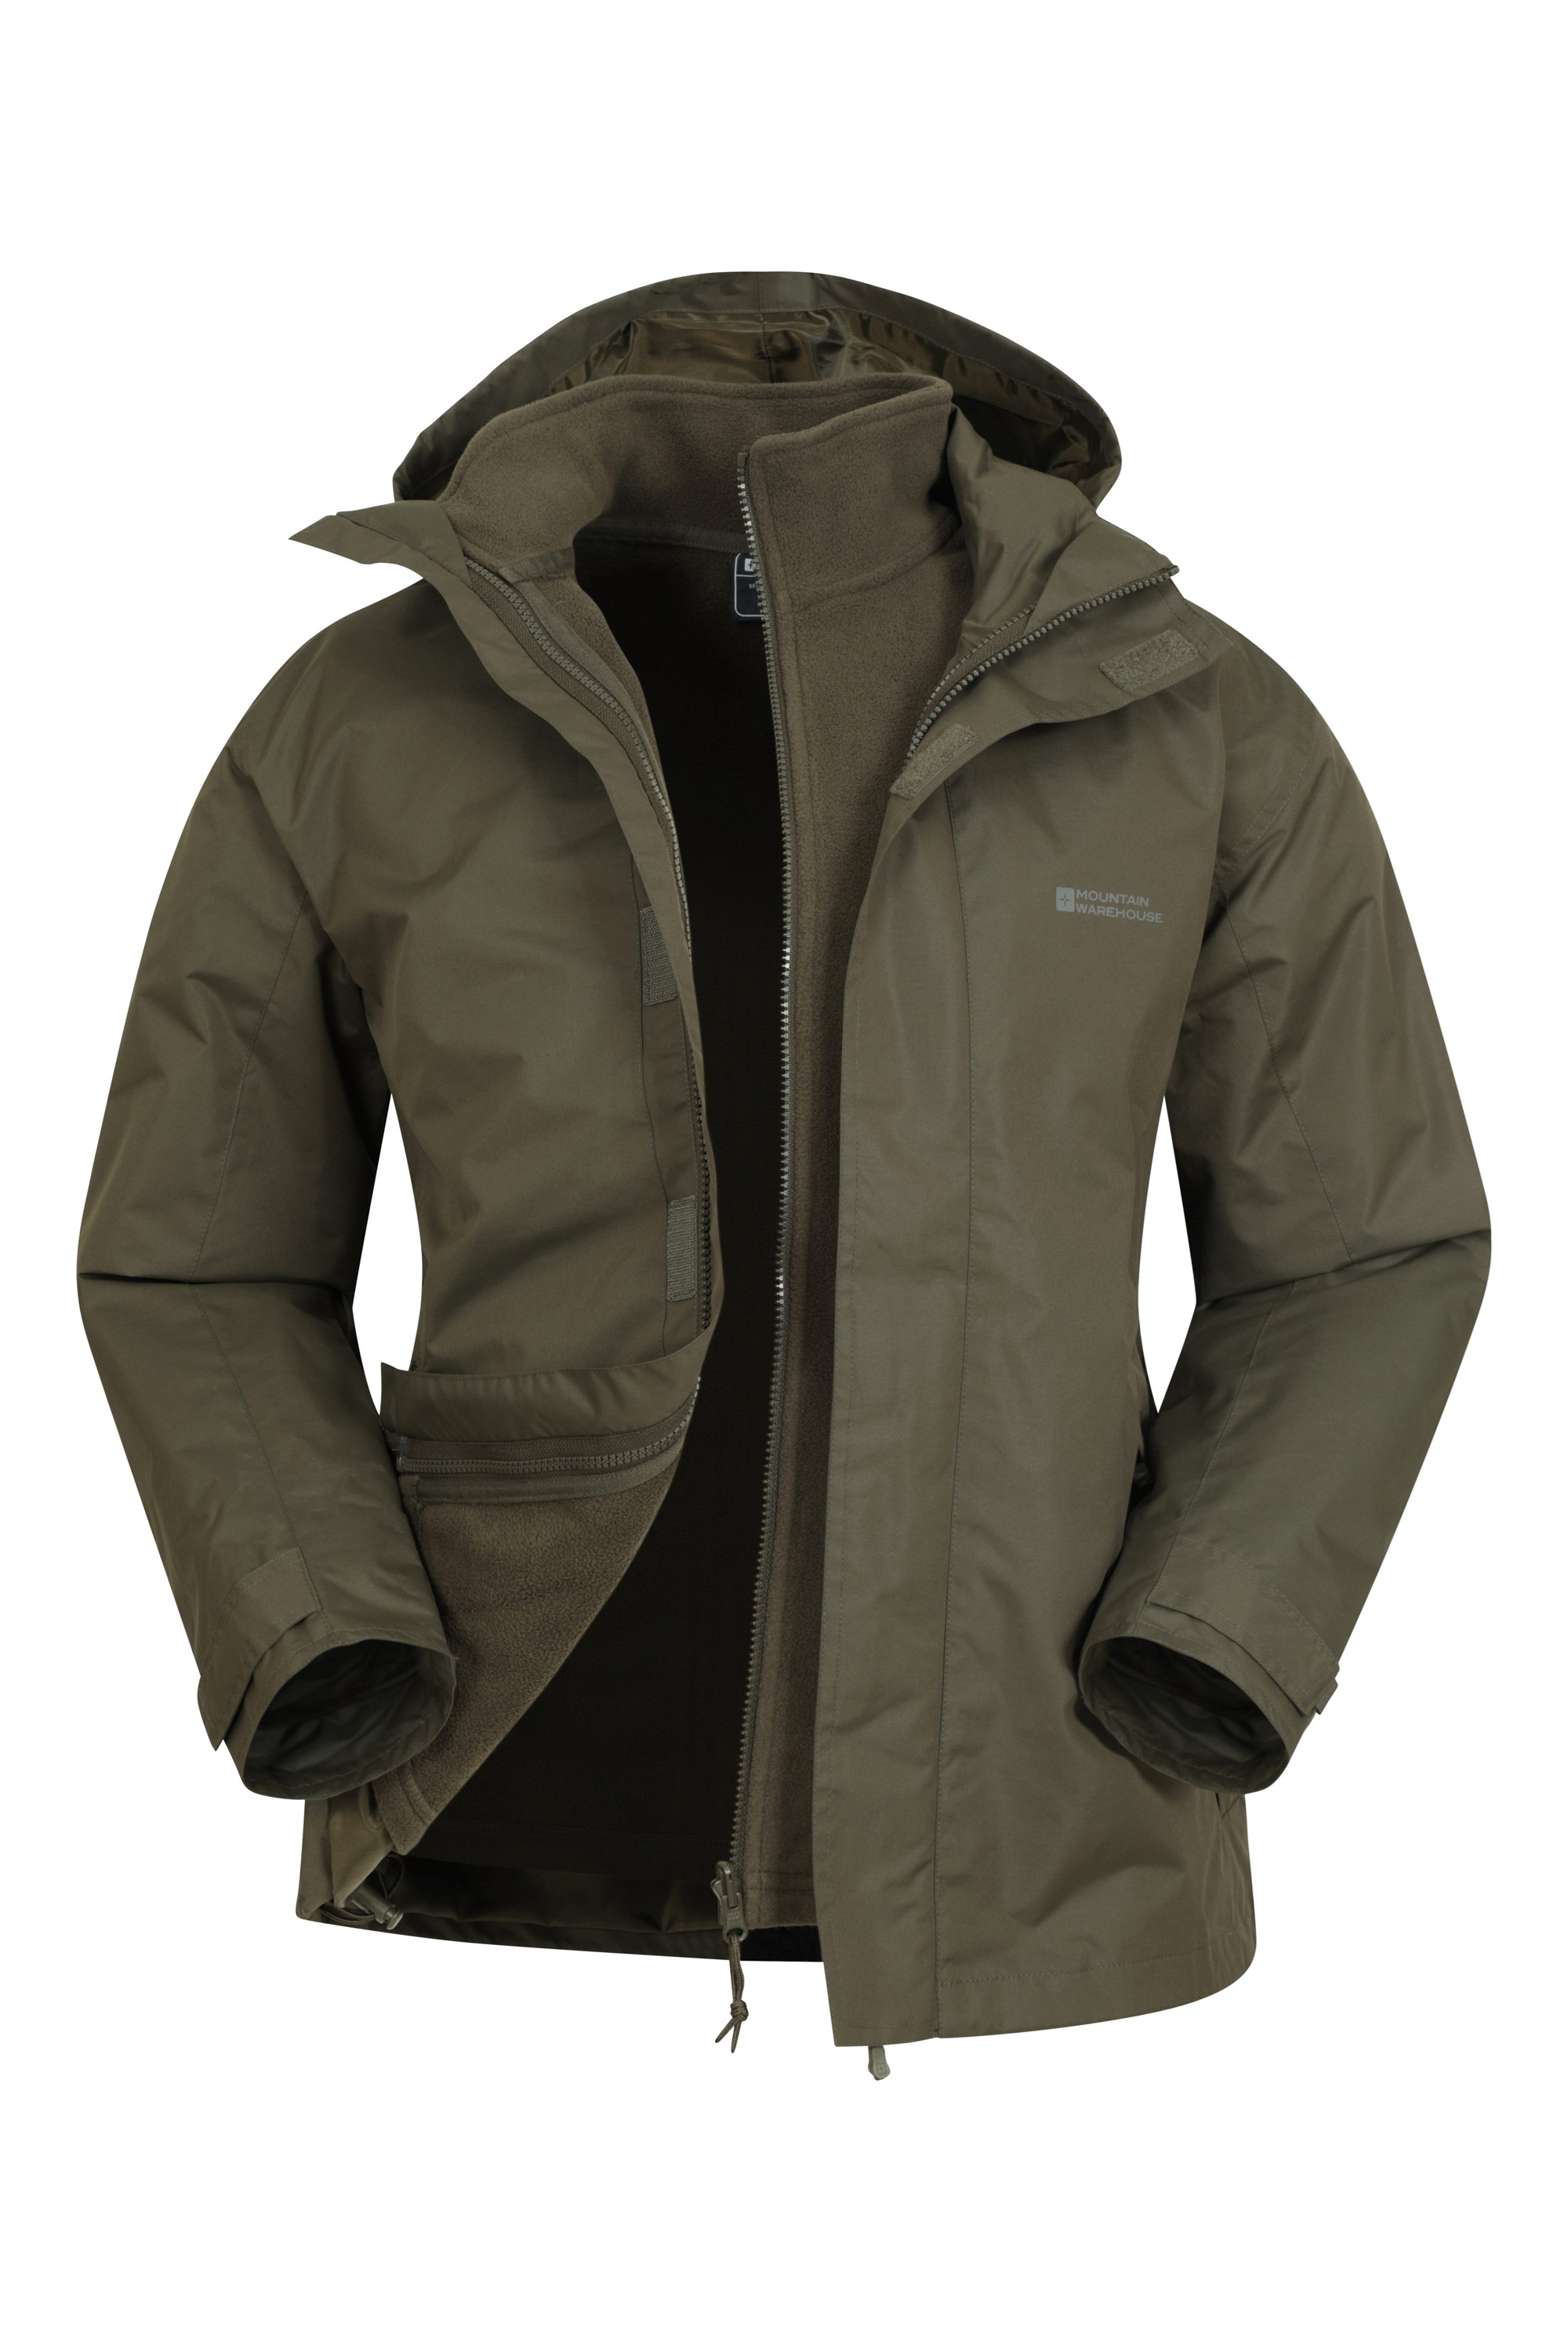 Fell Mens 3 in 1 Water Resistant Jacket | Mountain Warehouse US